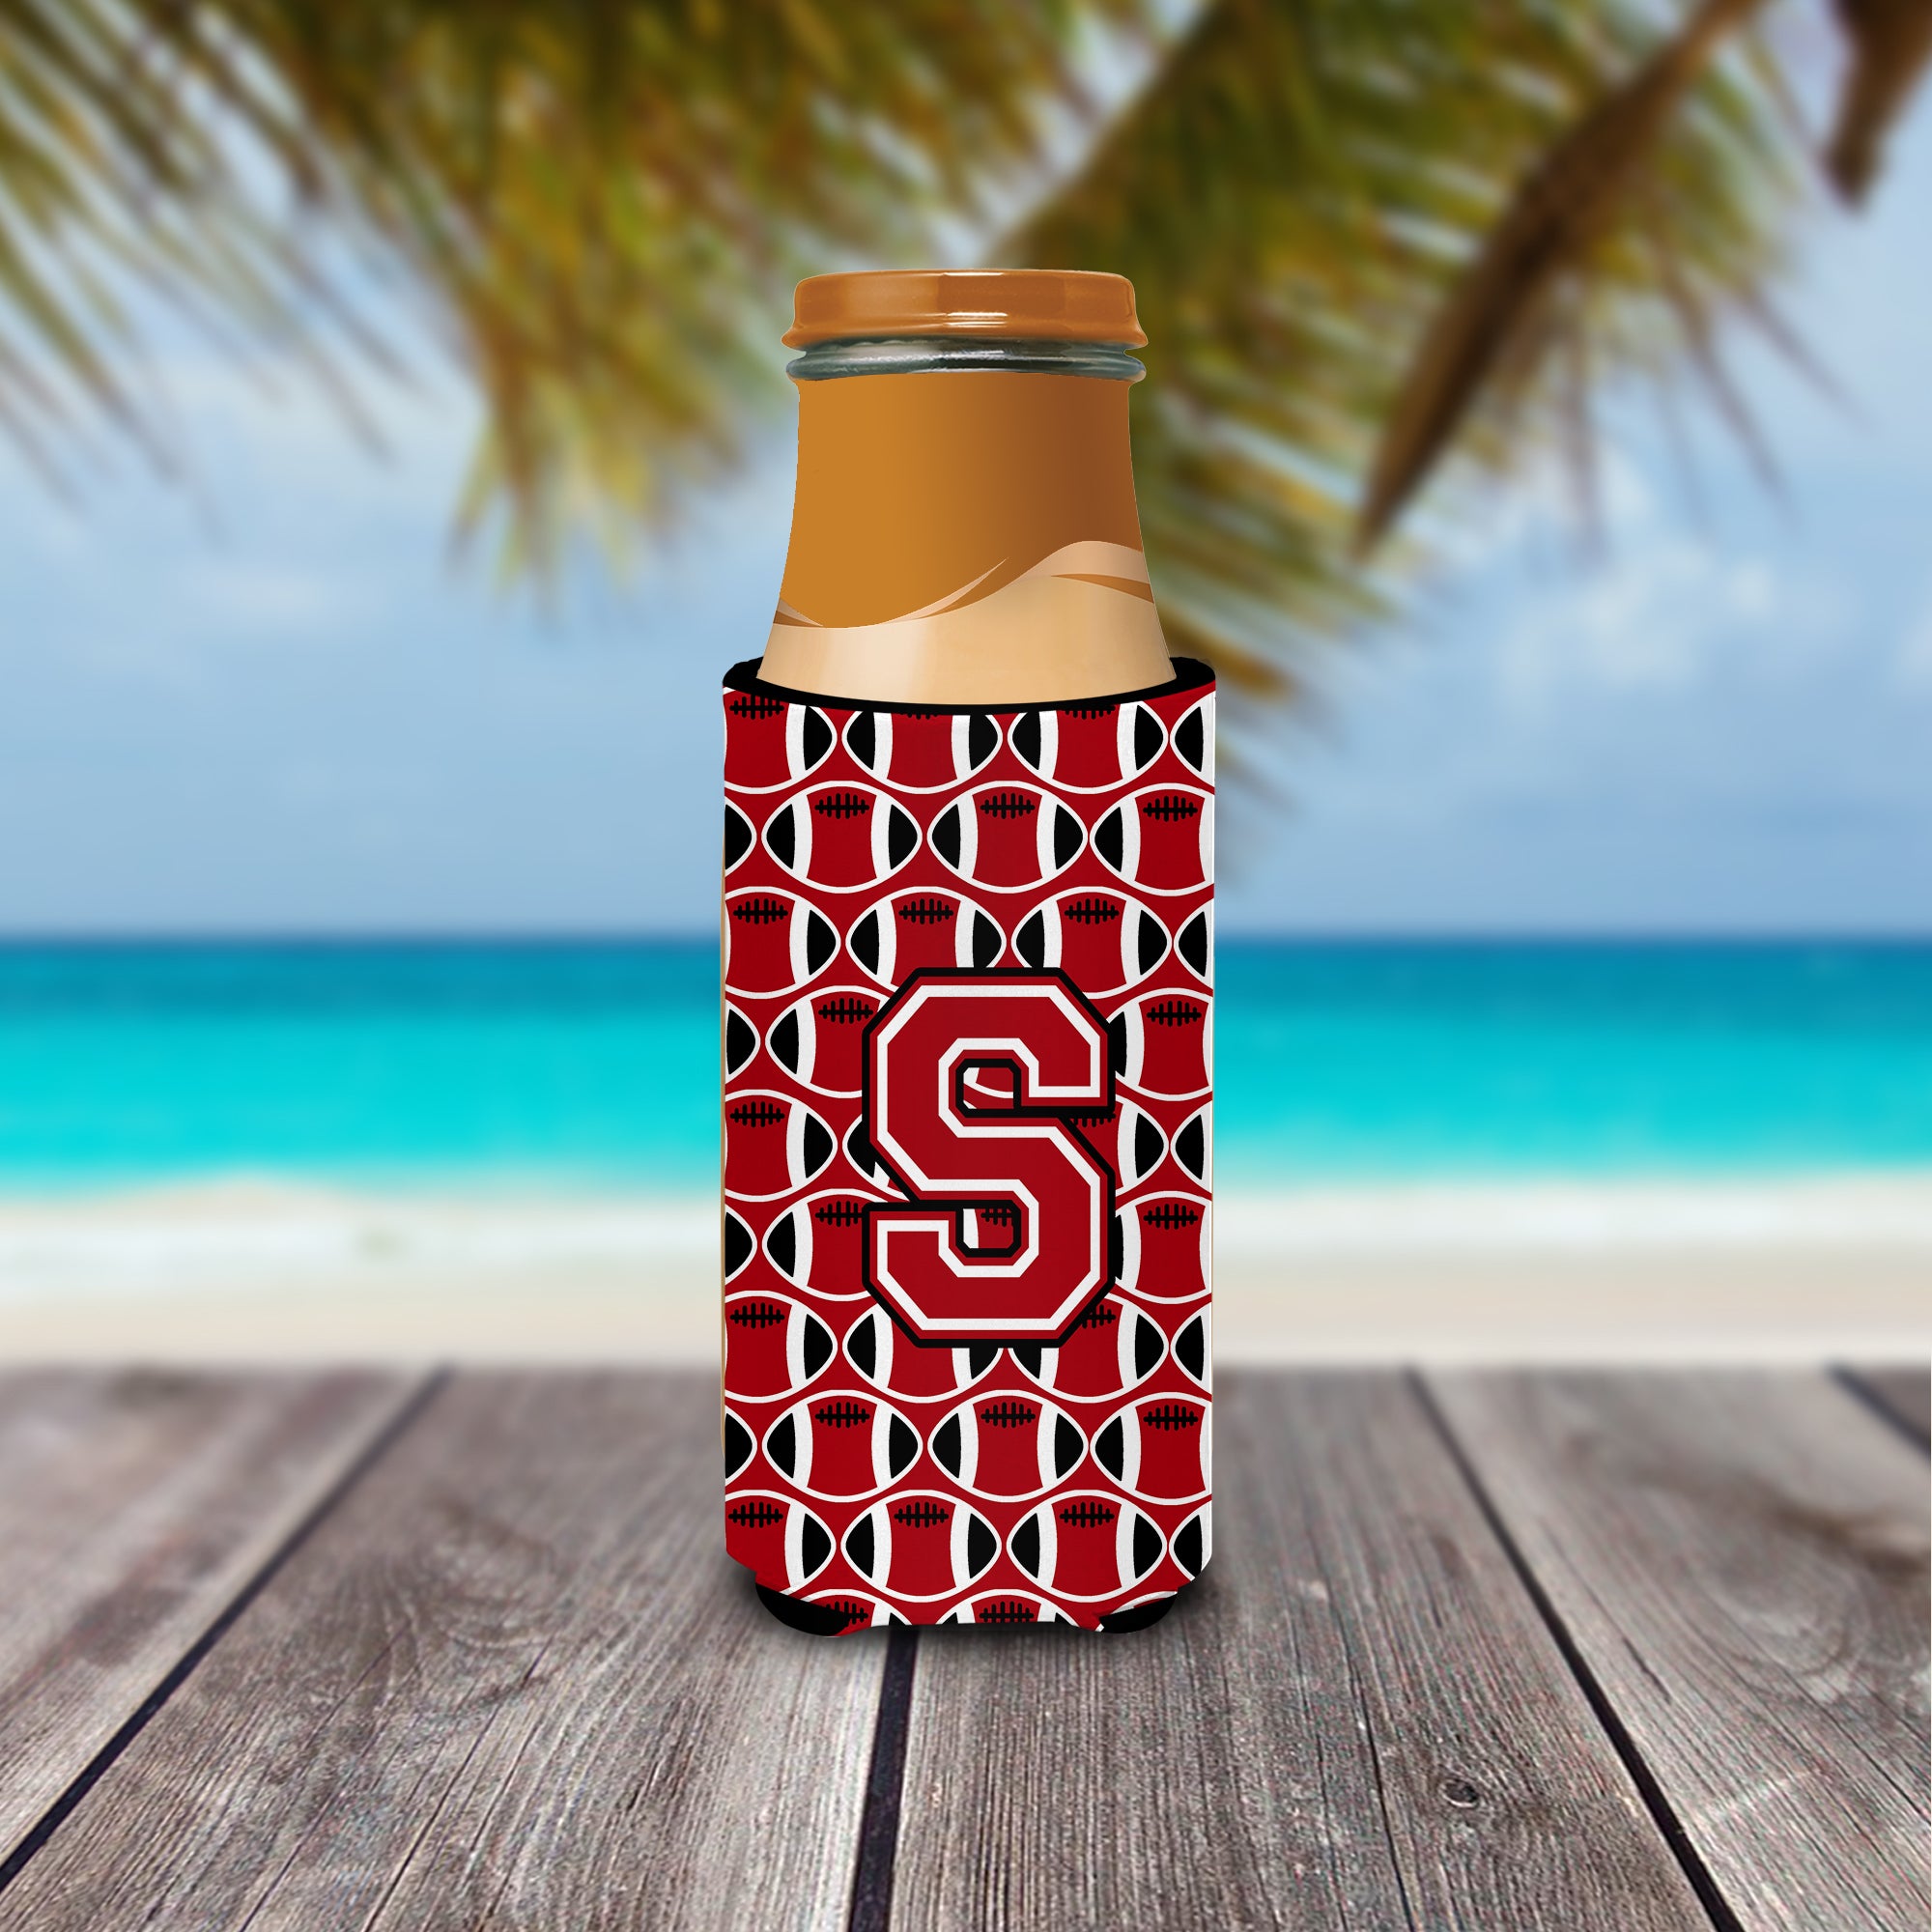 Letter S Football Red, Black and White Ultra Beverage Insulators for slim cans CJ1073-SMUK.